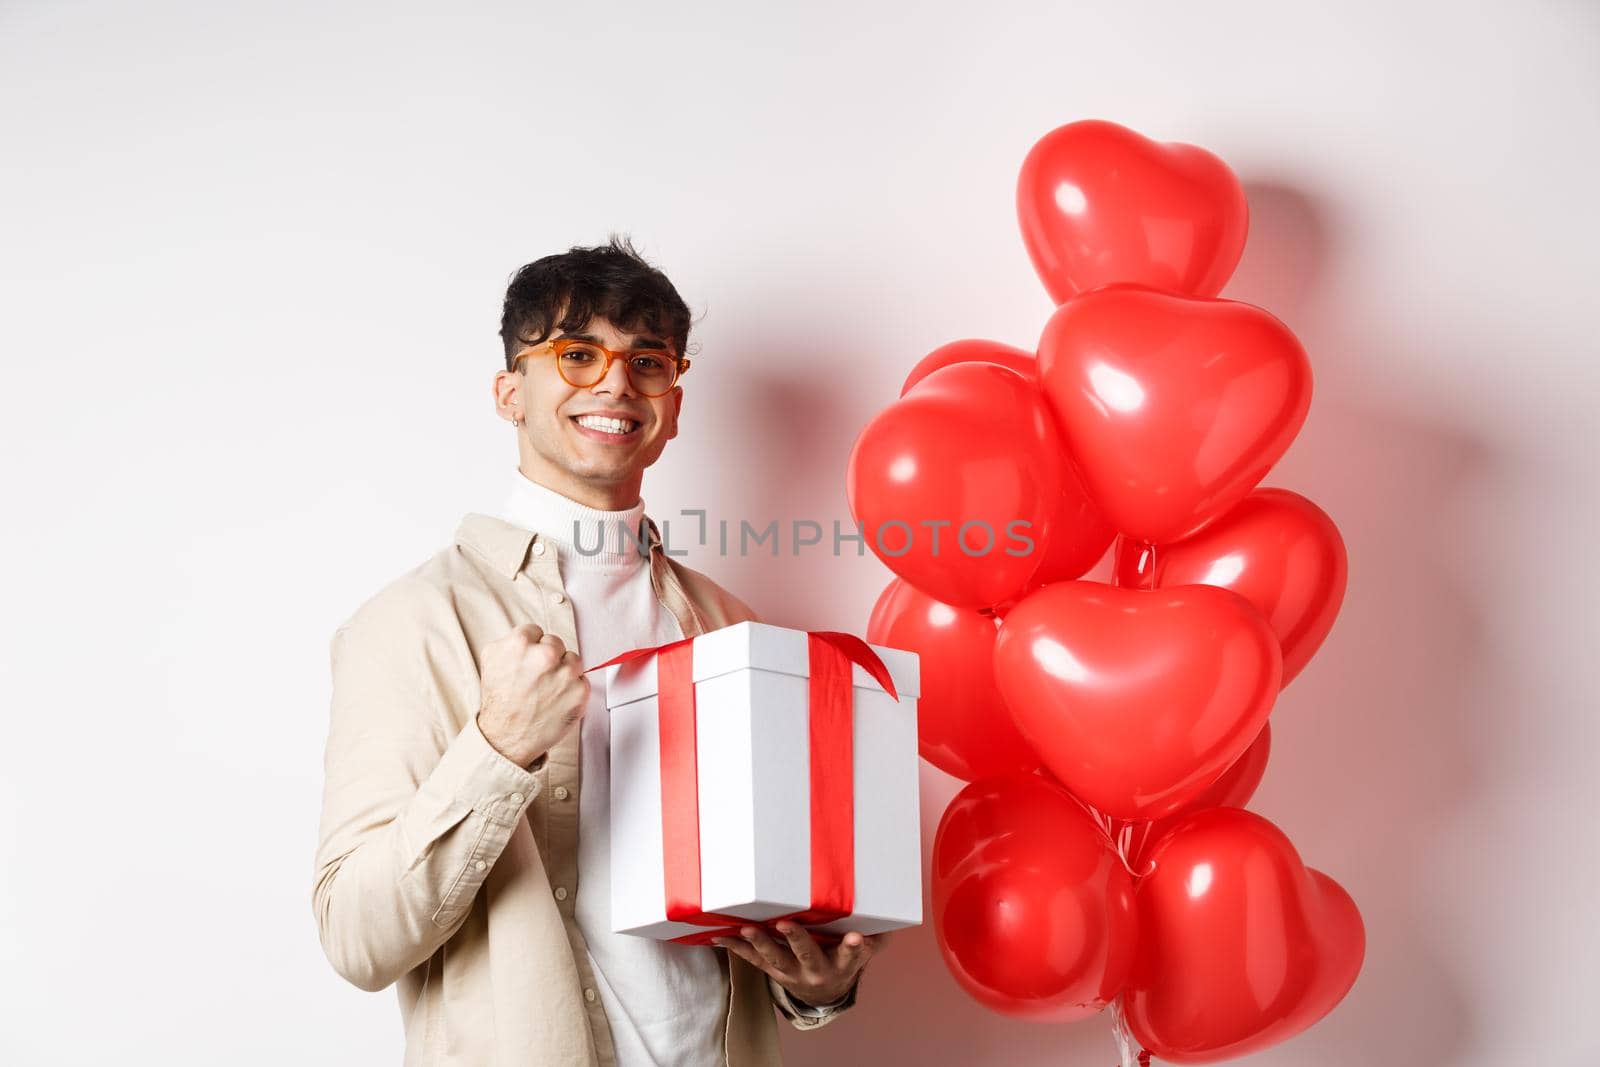 Valentines day and romance concept. Happy and confident boyfriend prepare gift for lover, saying yes and smiling, holding romantic gift, standing near red hearts balloons.